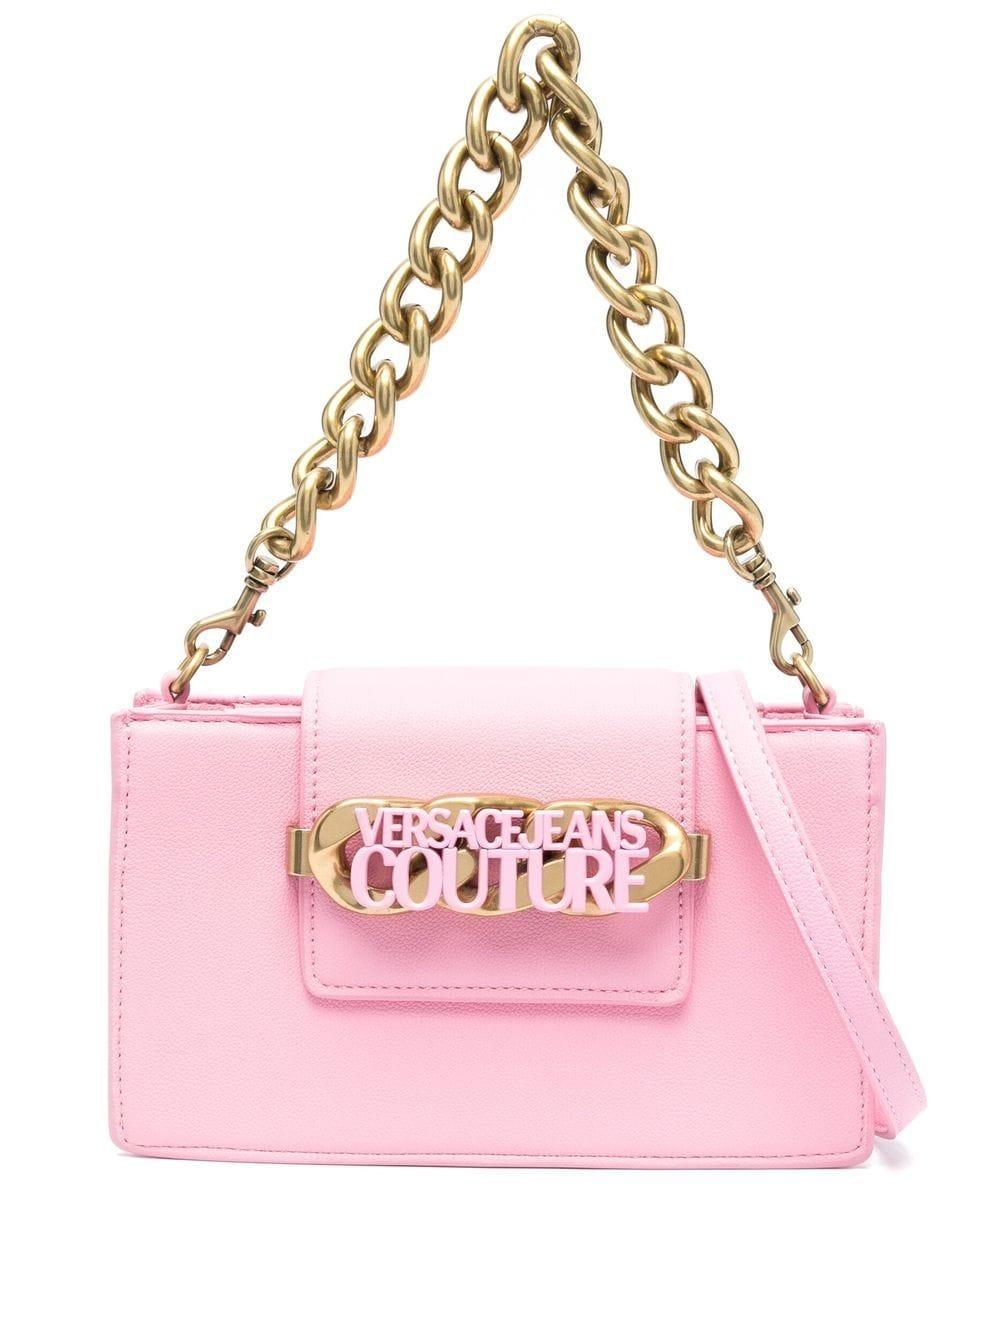 Versace Jeans Couture Chain-link Shoulder Bag in Pink | Lyst